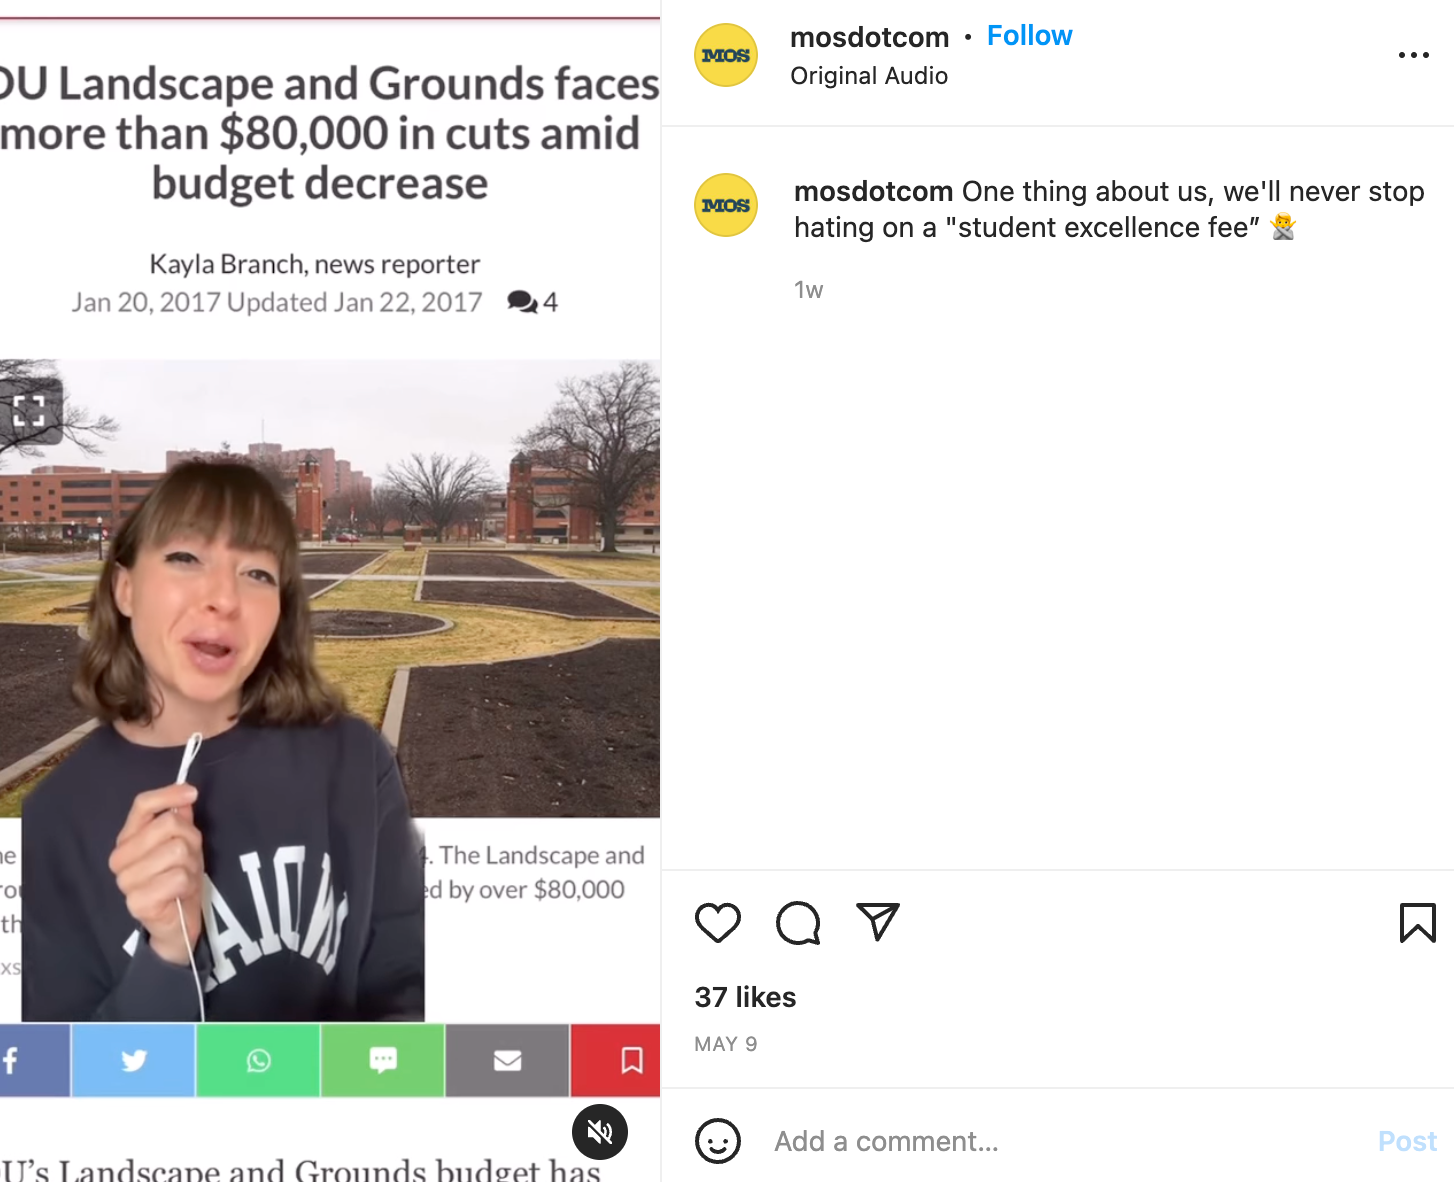 photo of news reporter talking about landscape and ground budget cuts on Instagram